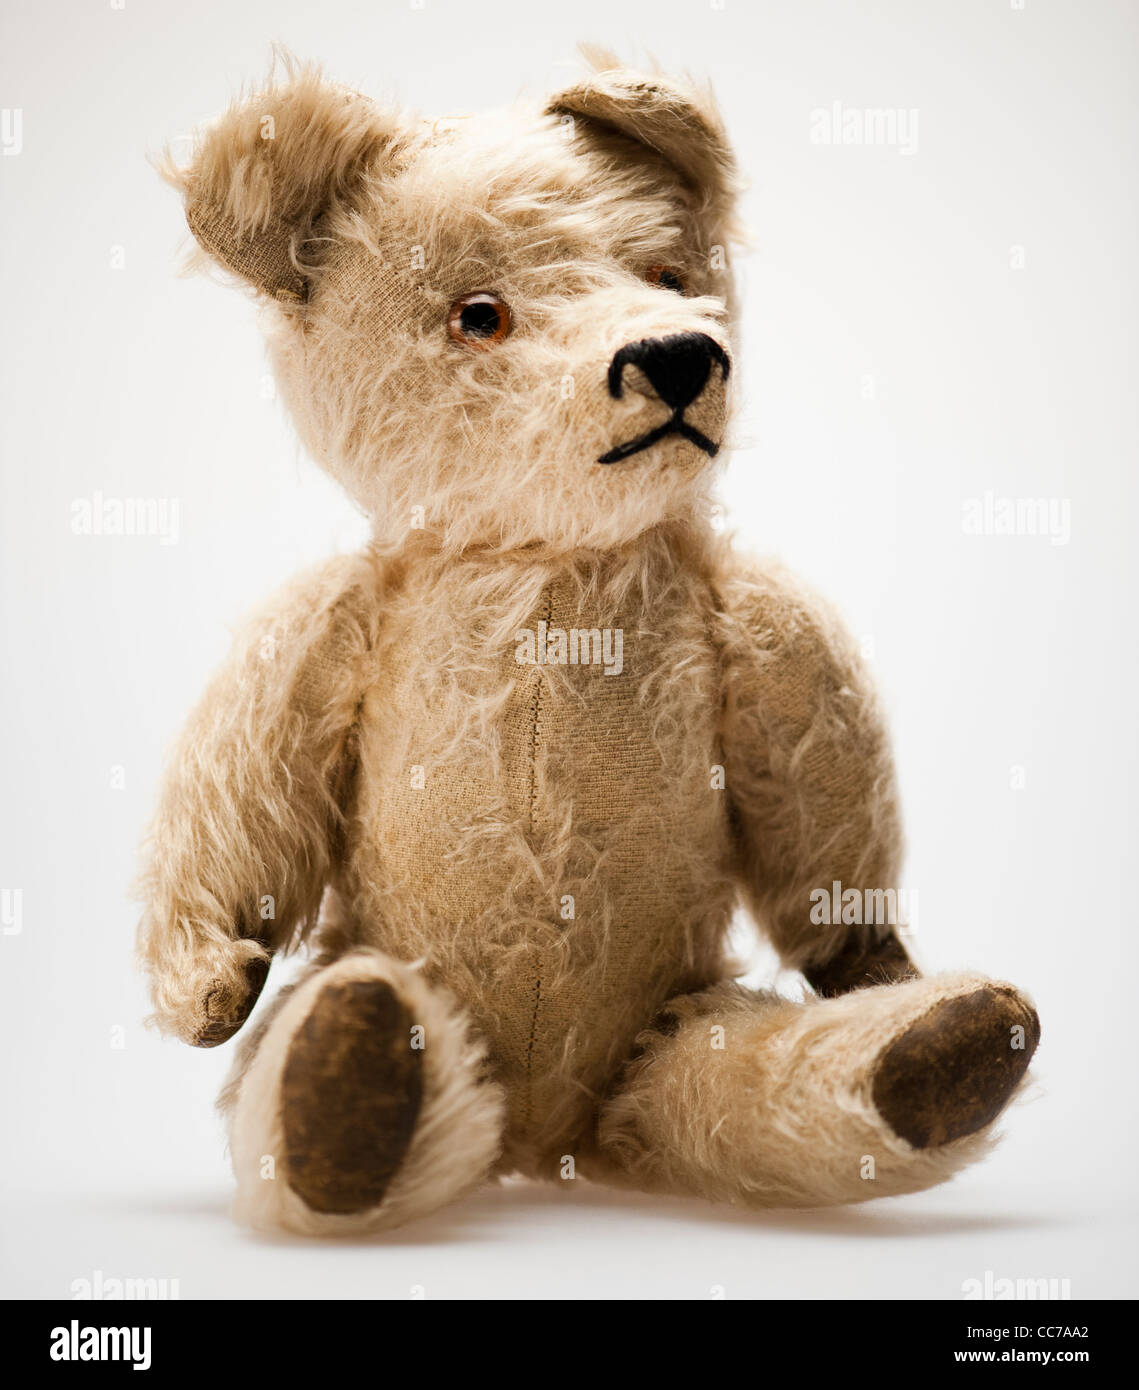 a battered threadbare old traditional childs stuffed toy teddy bear Stock Photo